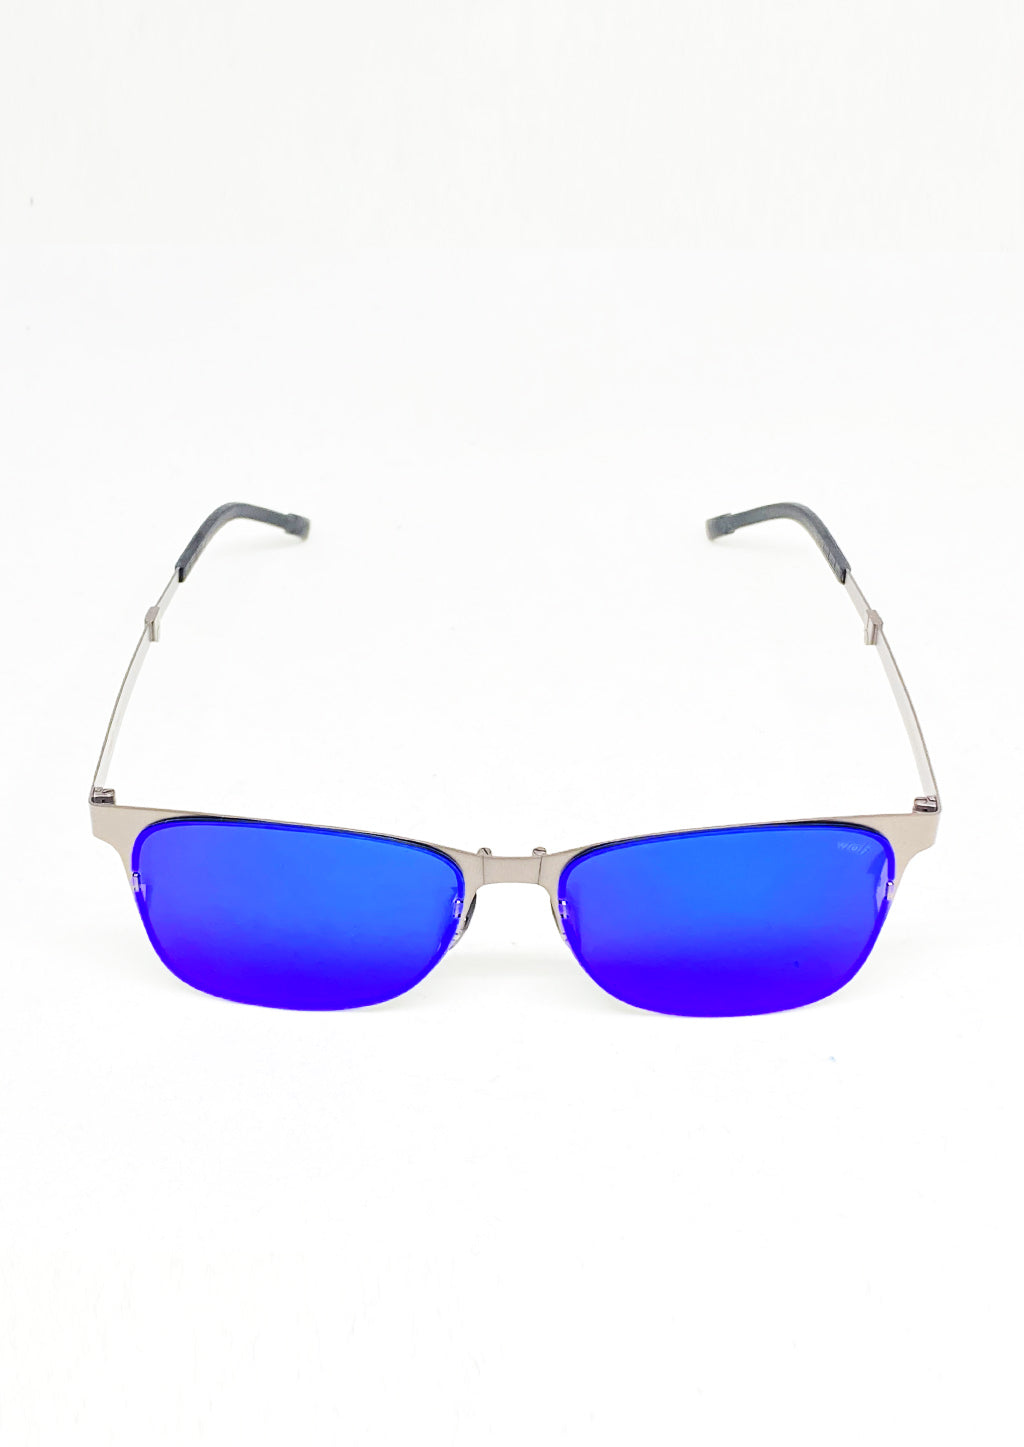 Foldable sunglasses - Rover classic wayfarer design - Front photo from above with blue lenses.